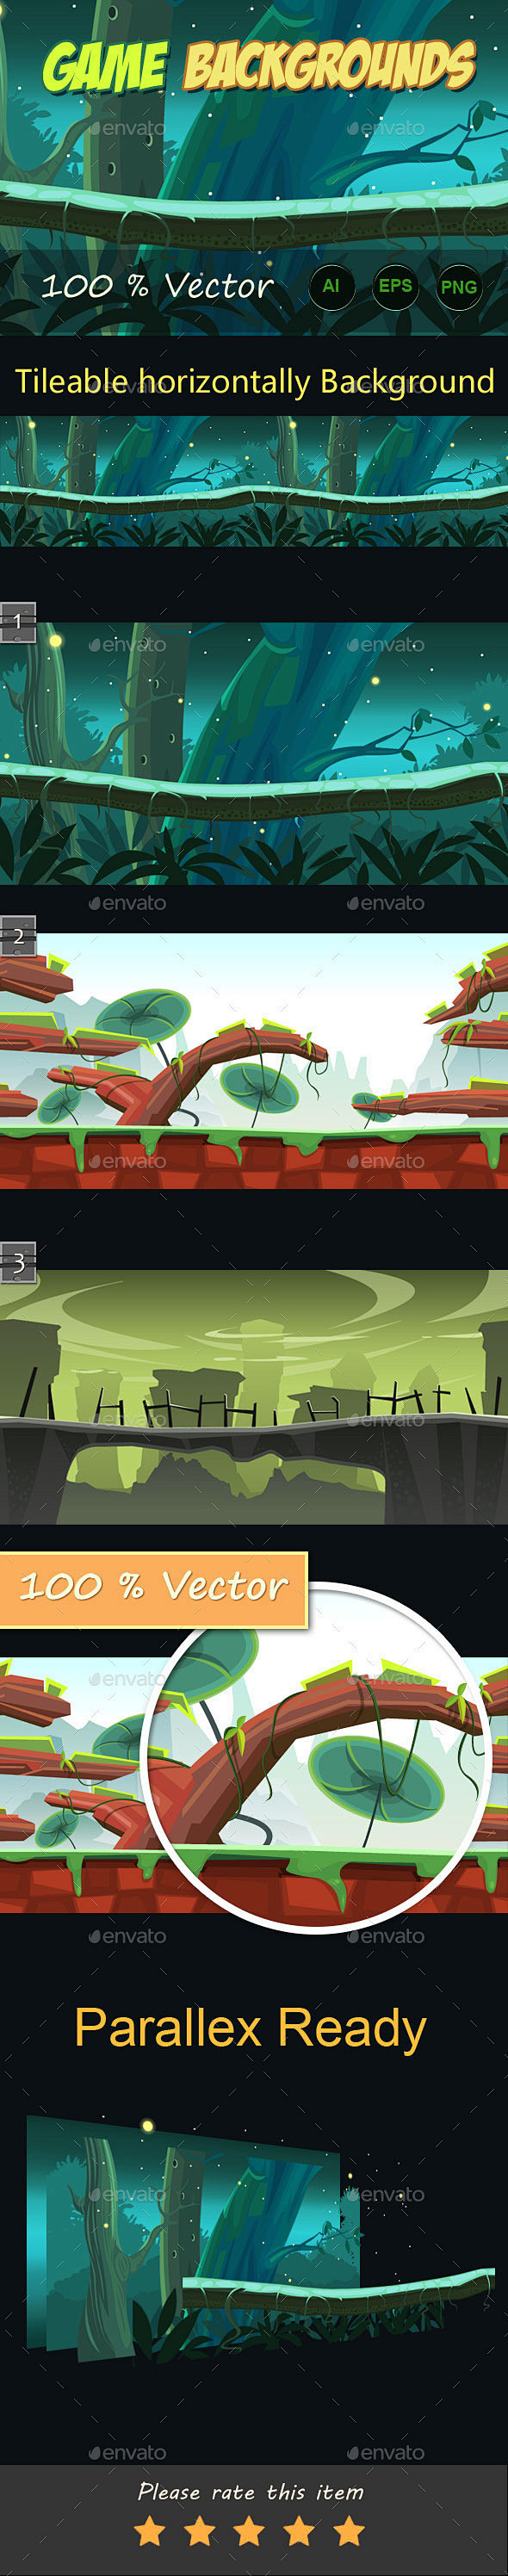 game backgrounds : g...